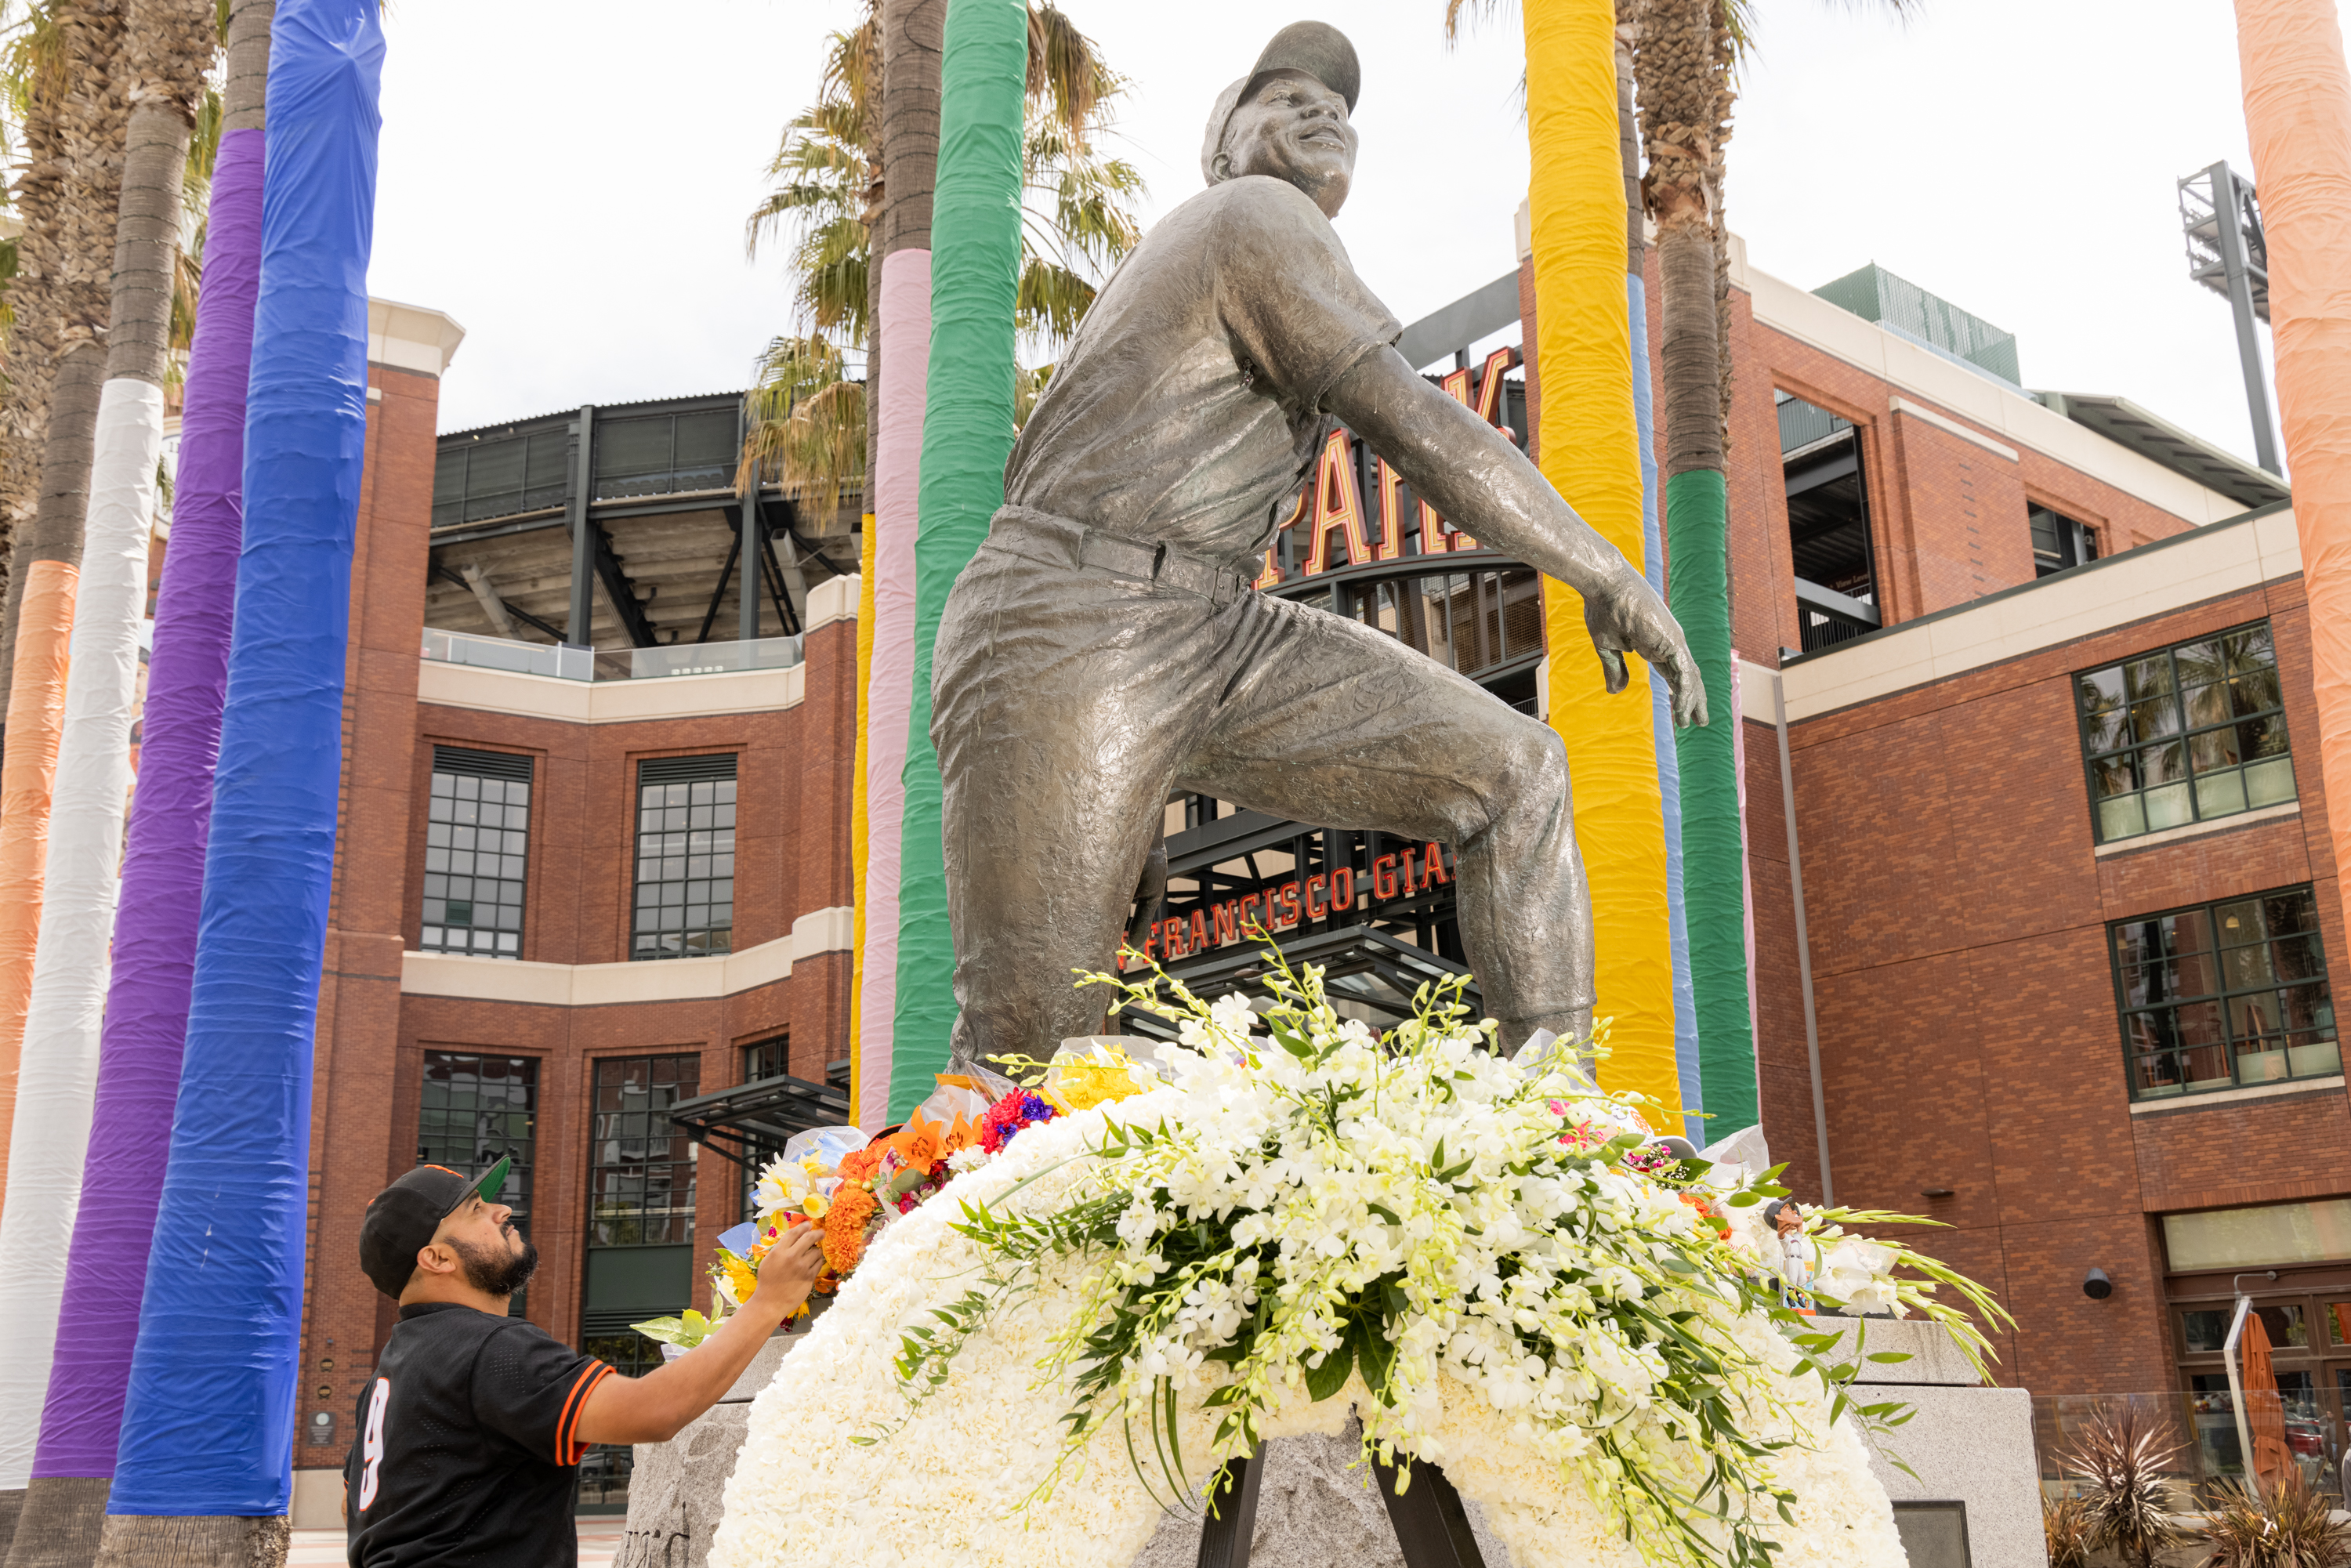 A statue of a baseball player is surrounded by colorful wrapped poles and flowers. A man wearing a baseball jersey is adjusting a floral display at the statue's base.